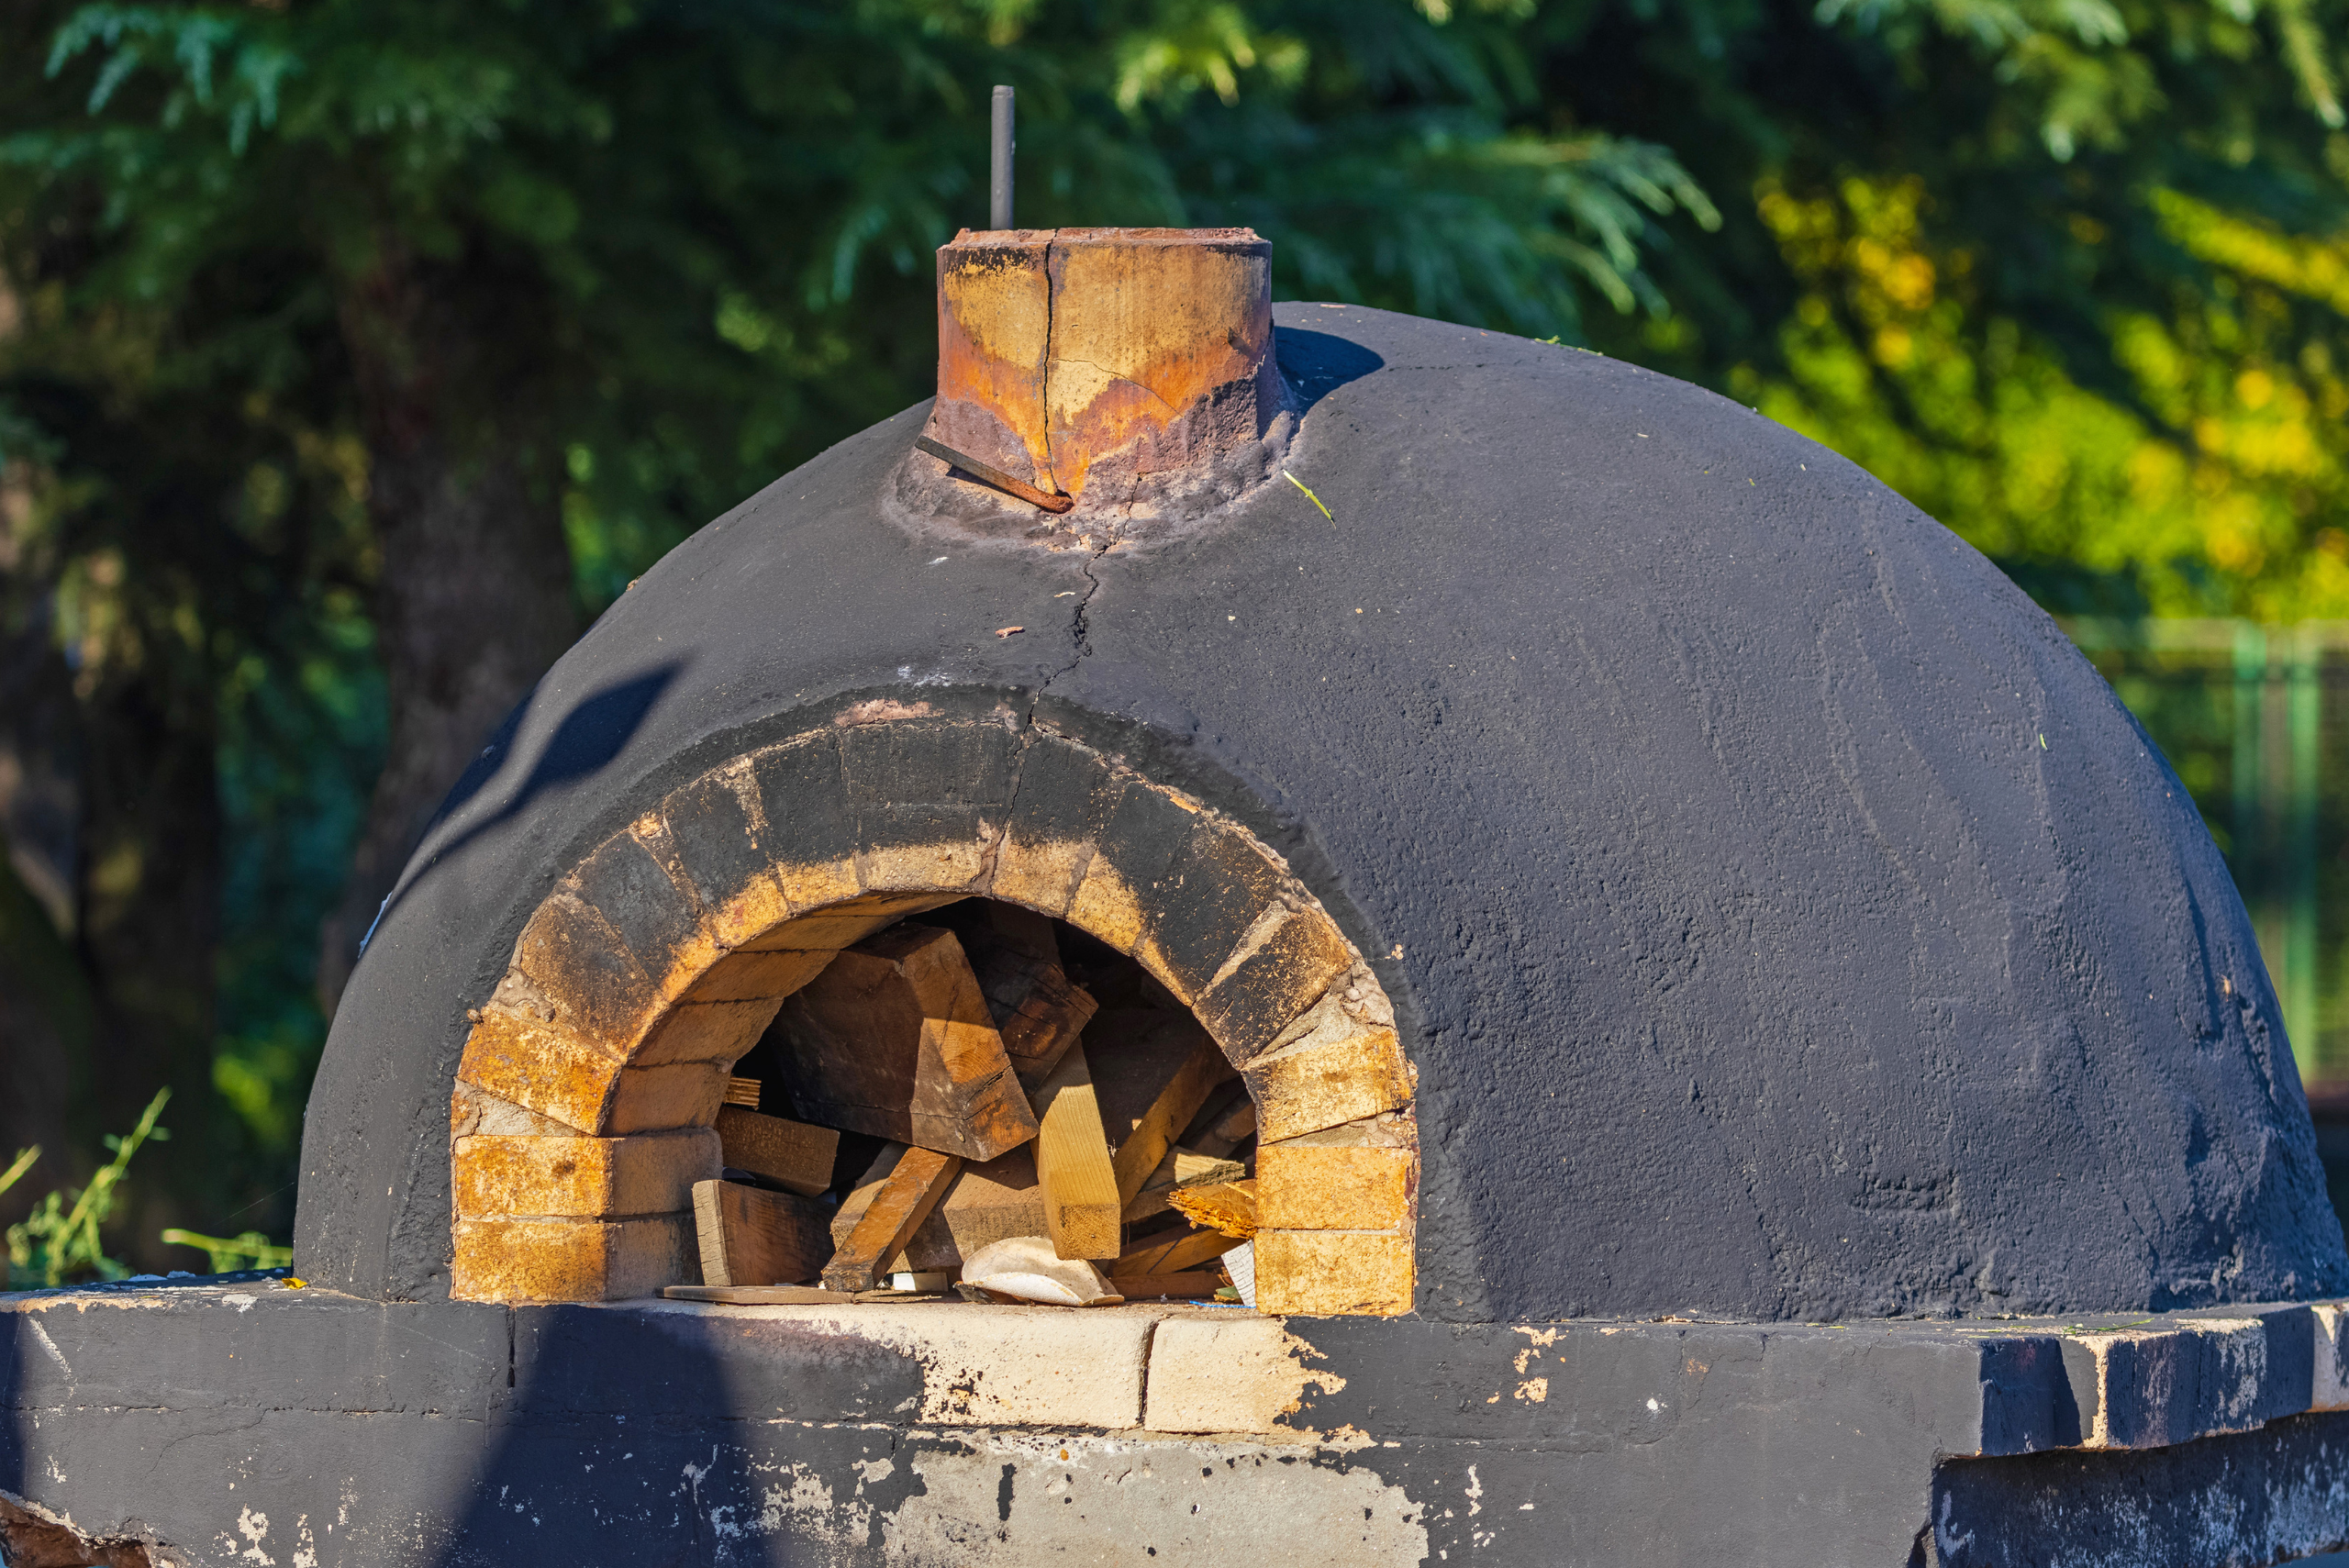 Brick outdoor pizza oven covered in cement.